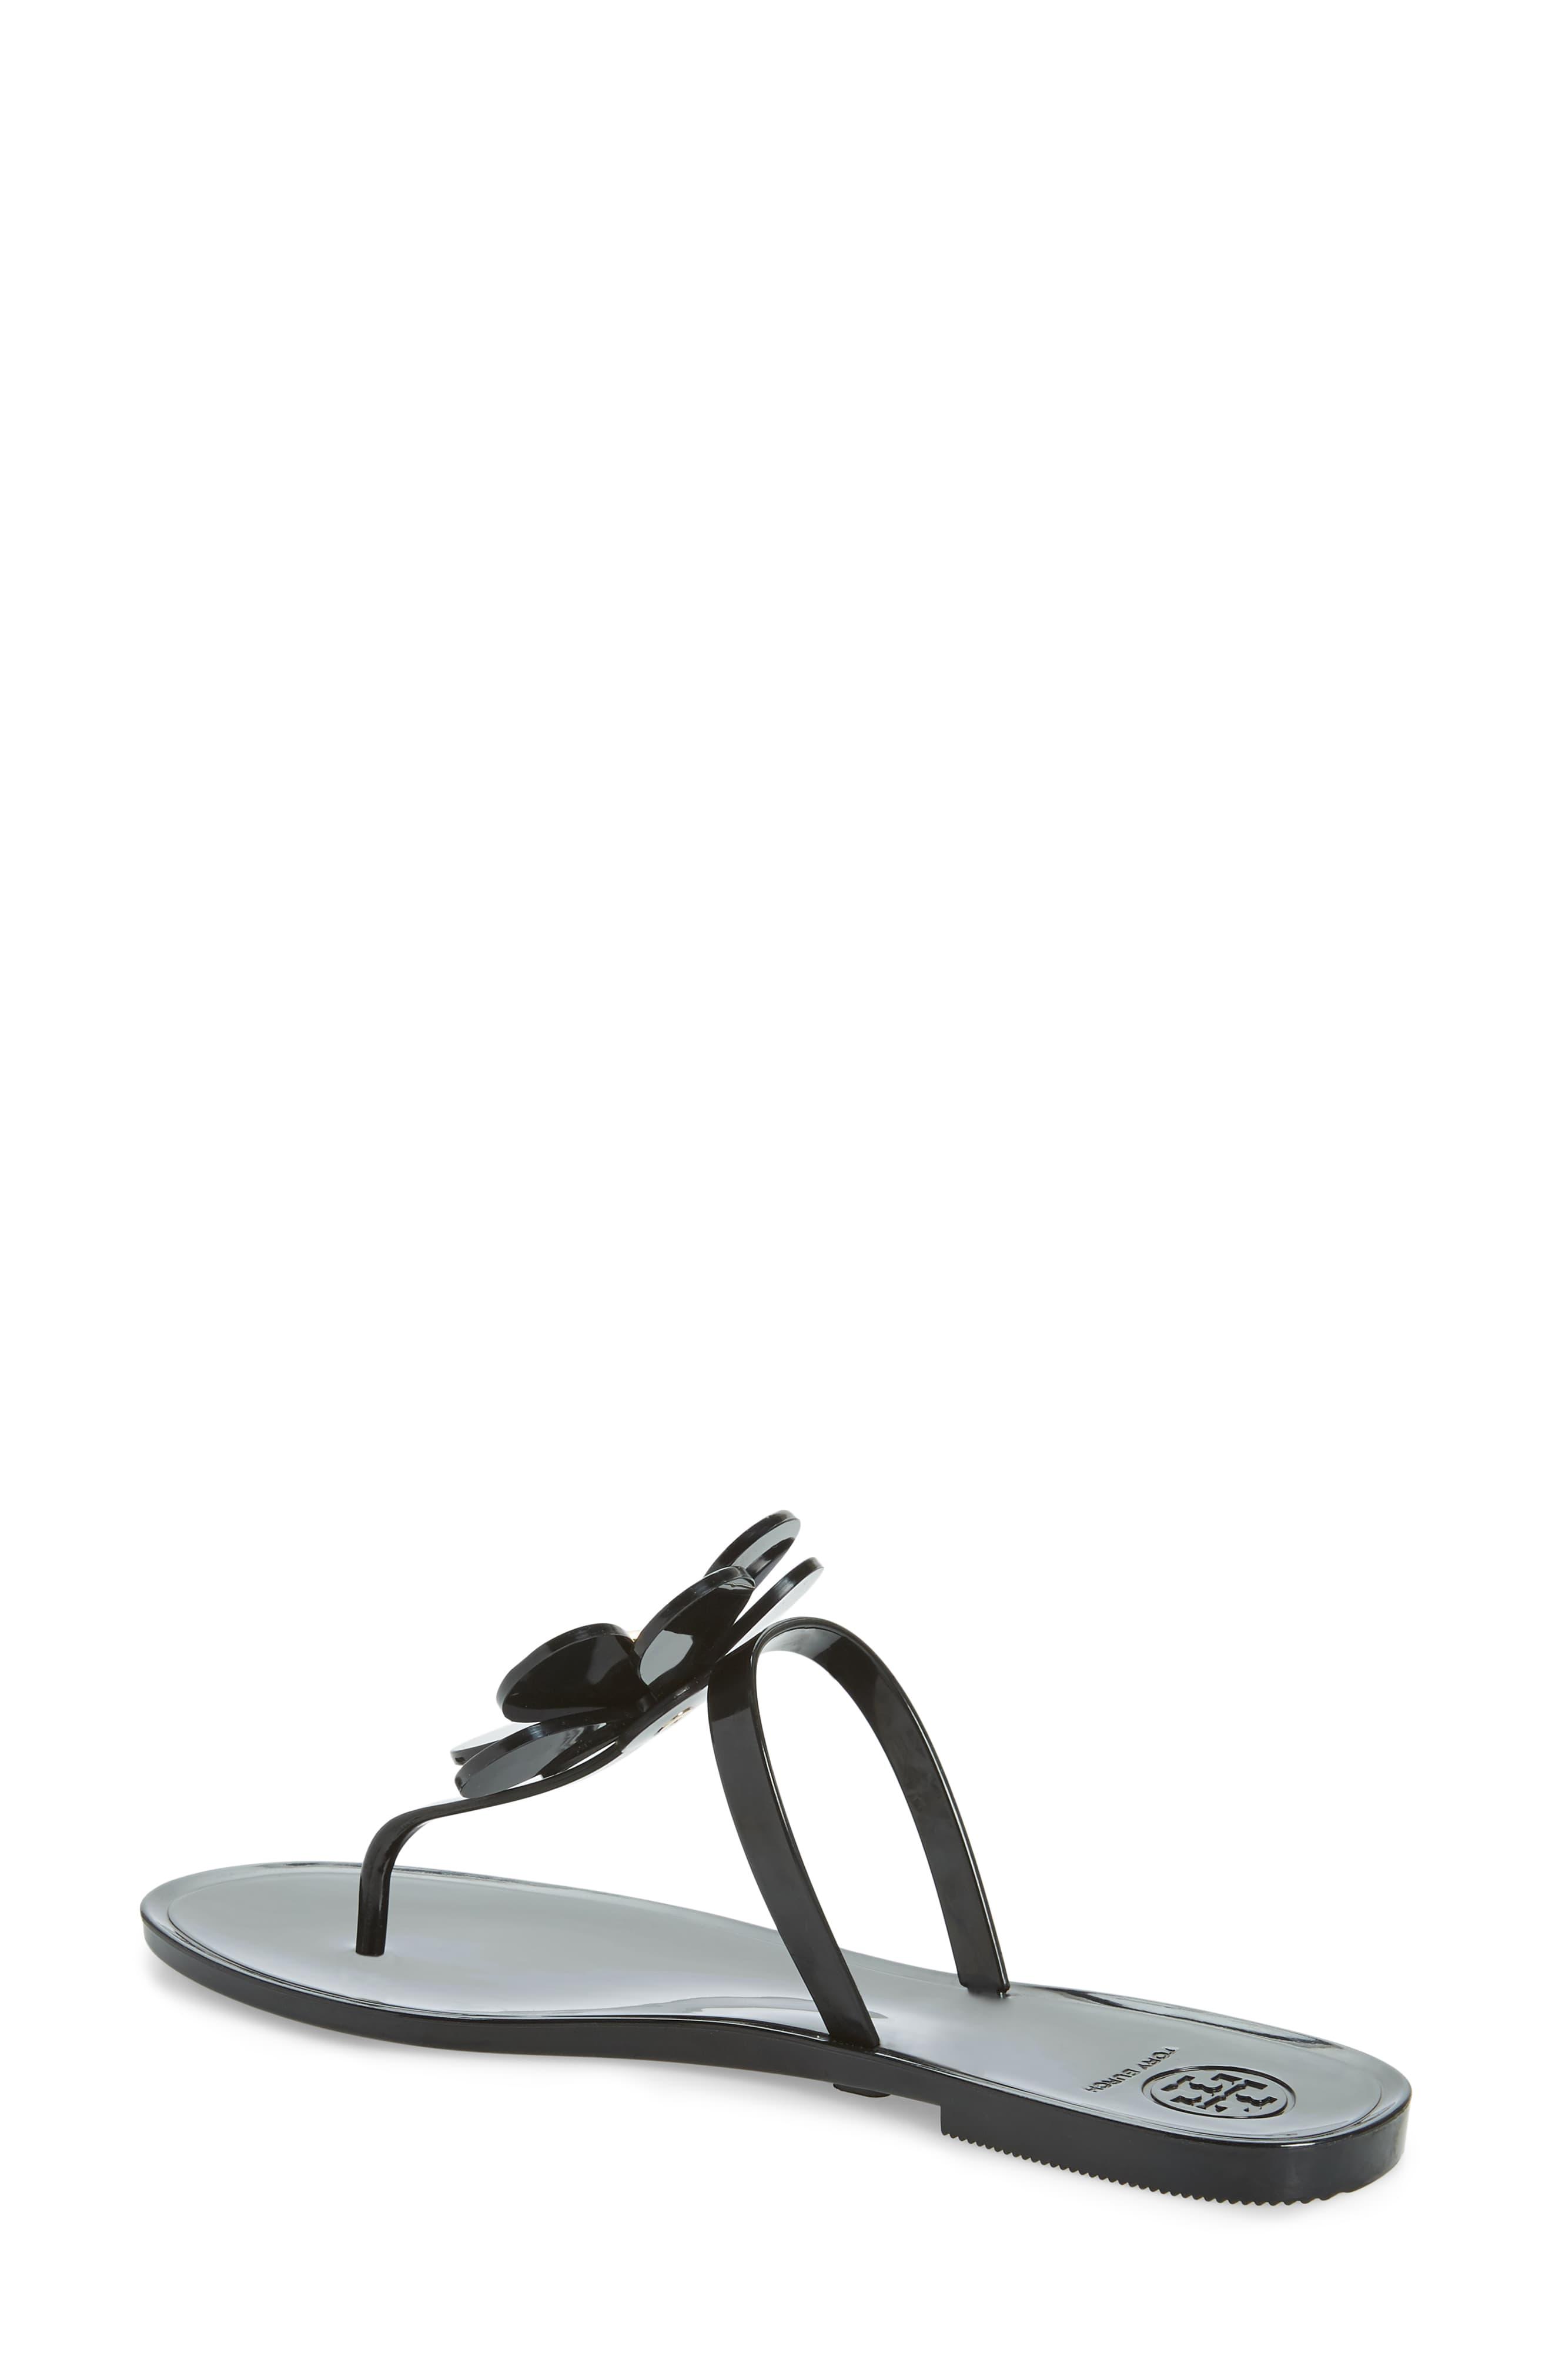 Tory Burch Floral Jelly Flip Flop in Black - Lyst